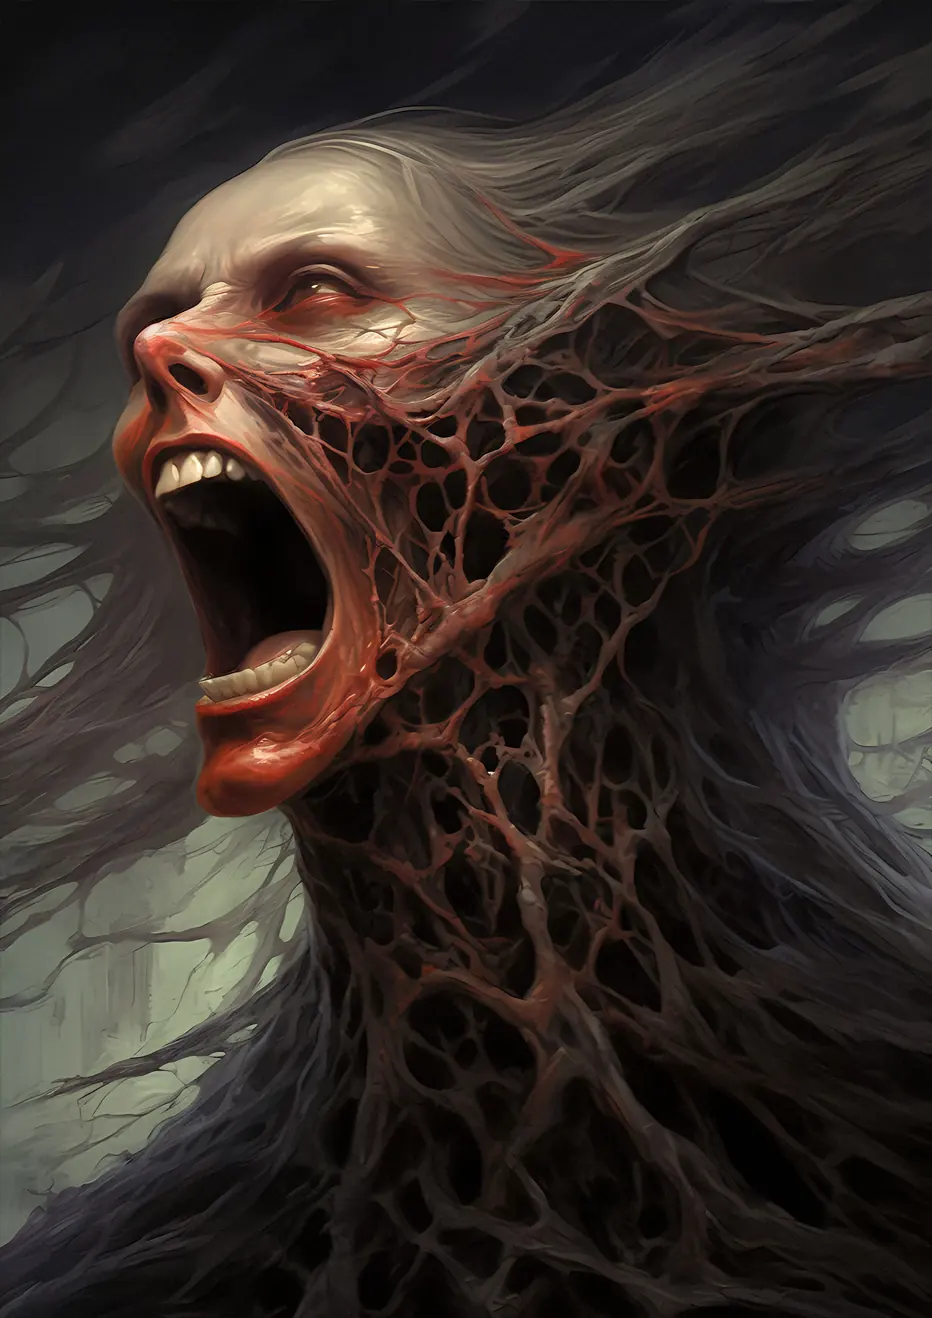 Veins of Sorrow, a surreal painting of a woman merging with tree-like branches, screaming in pain. Sorrowful Veins.